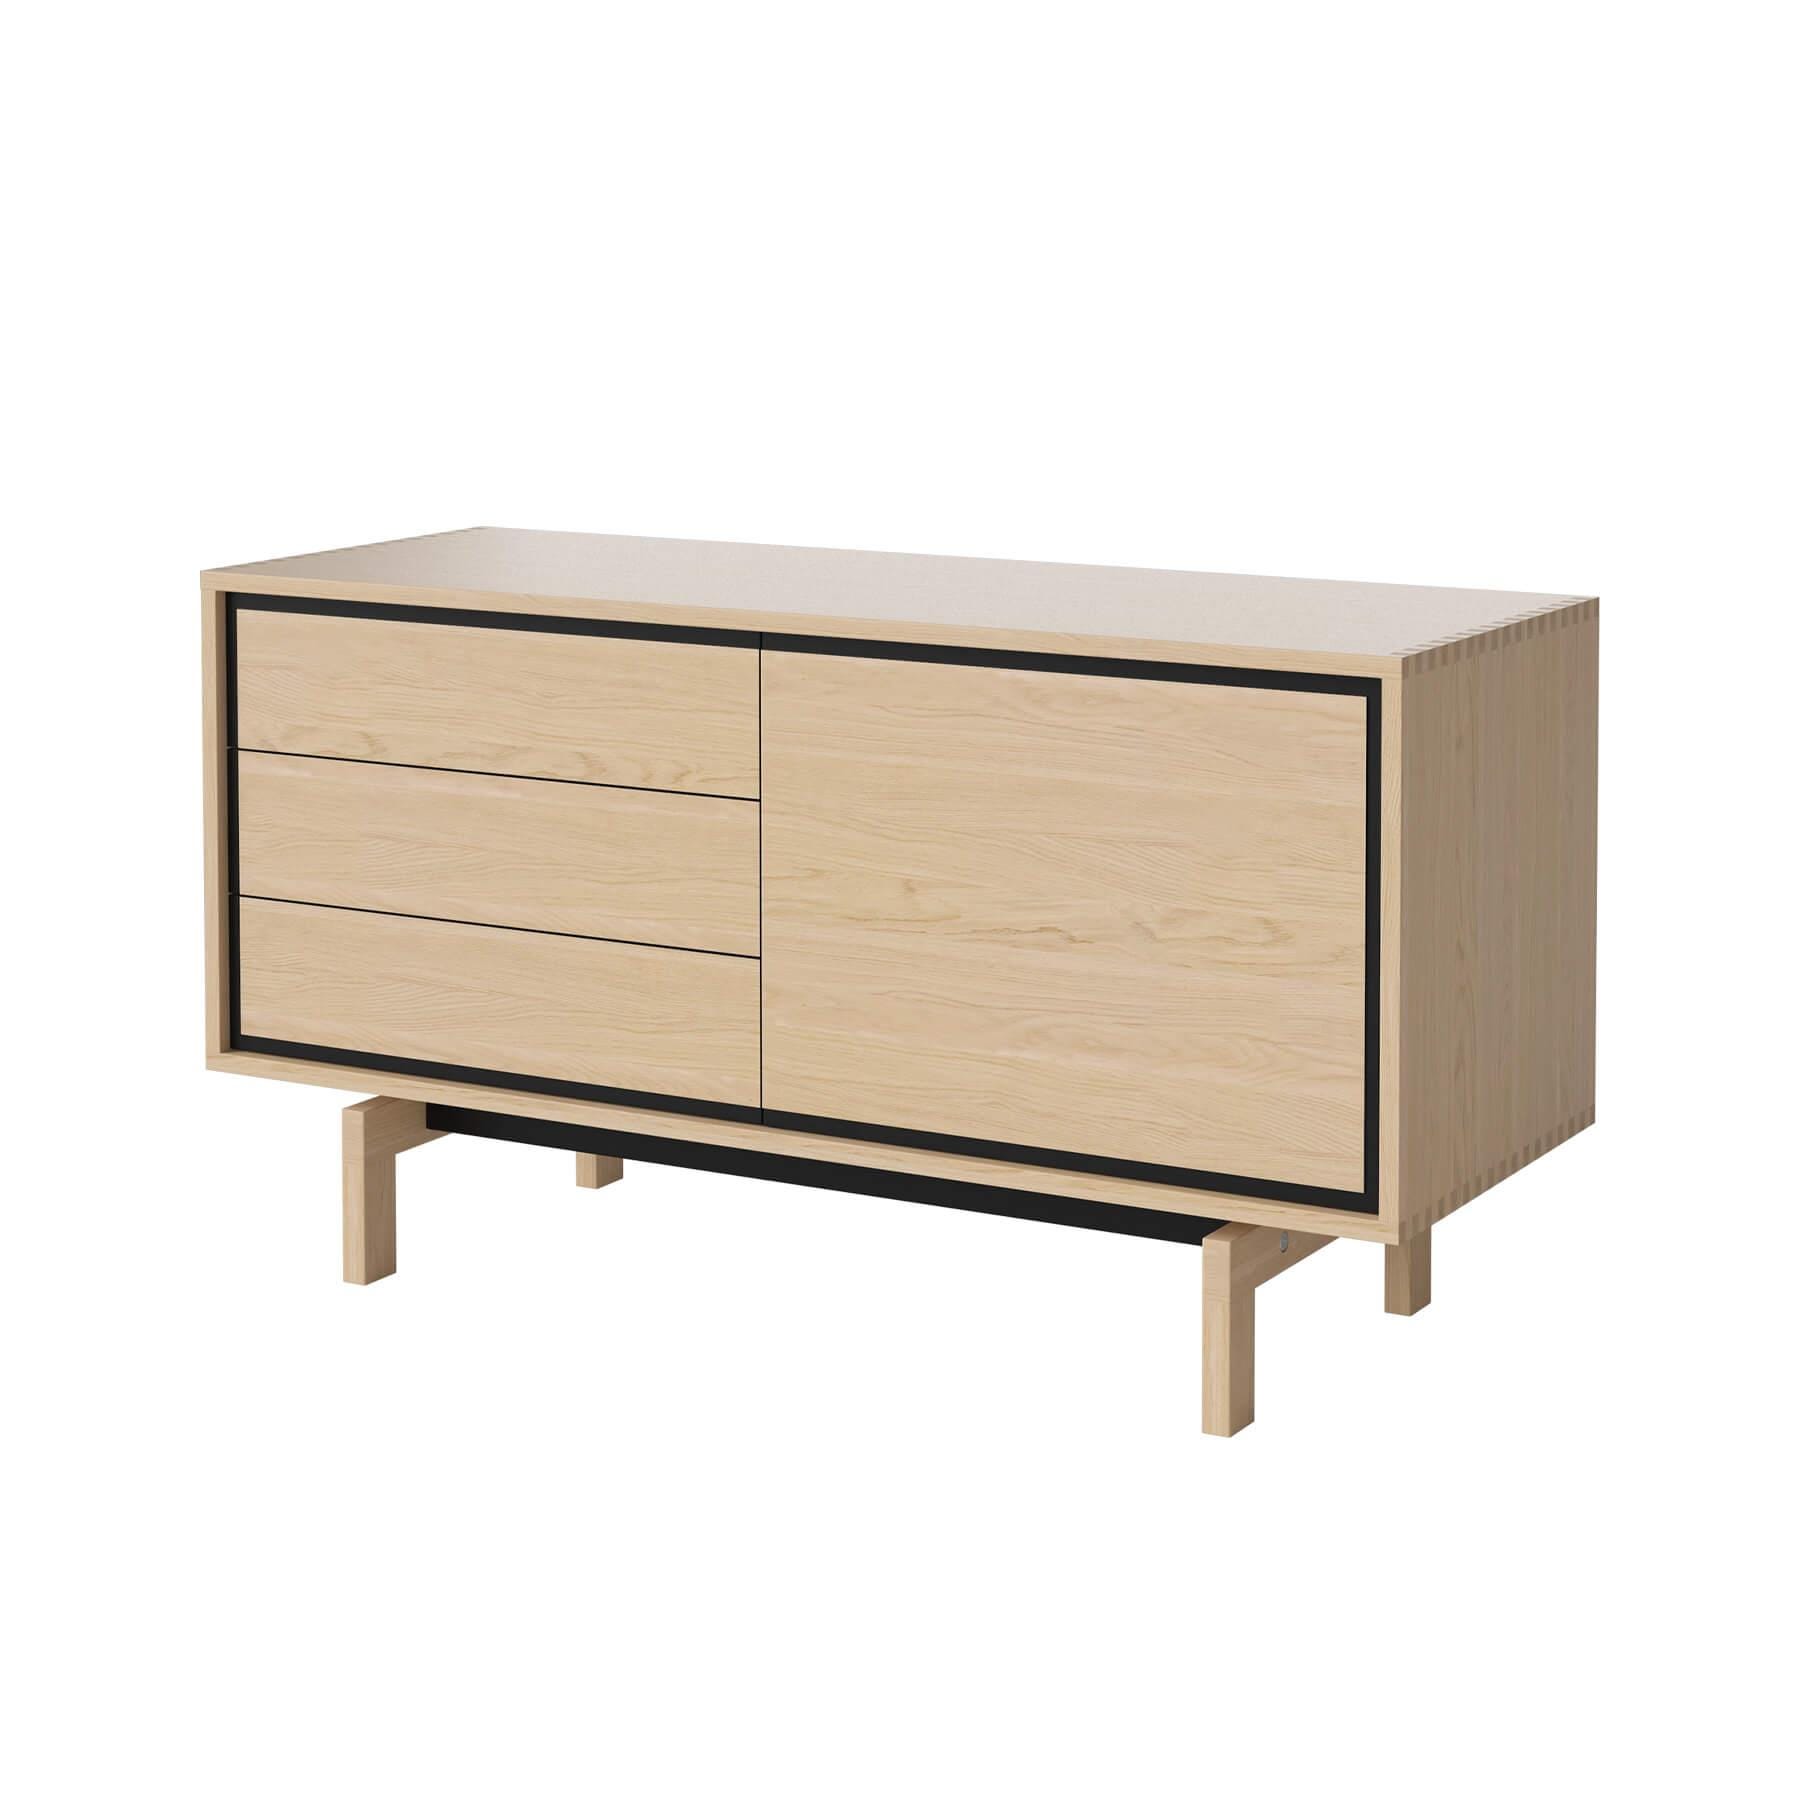 Bolia Floow Sideboard Small White Oiled Oak Light Wood Designer Furniture From Holloways Of Ludlow